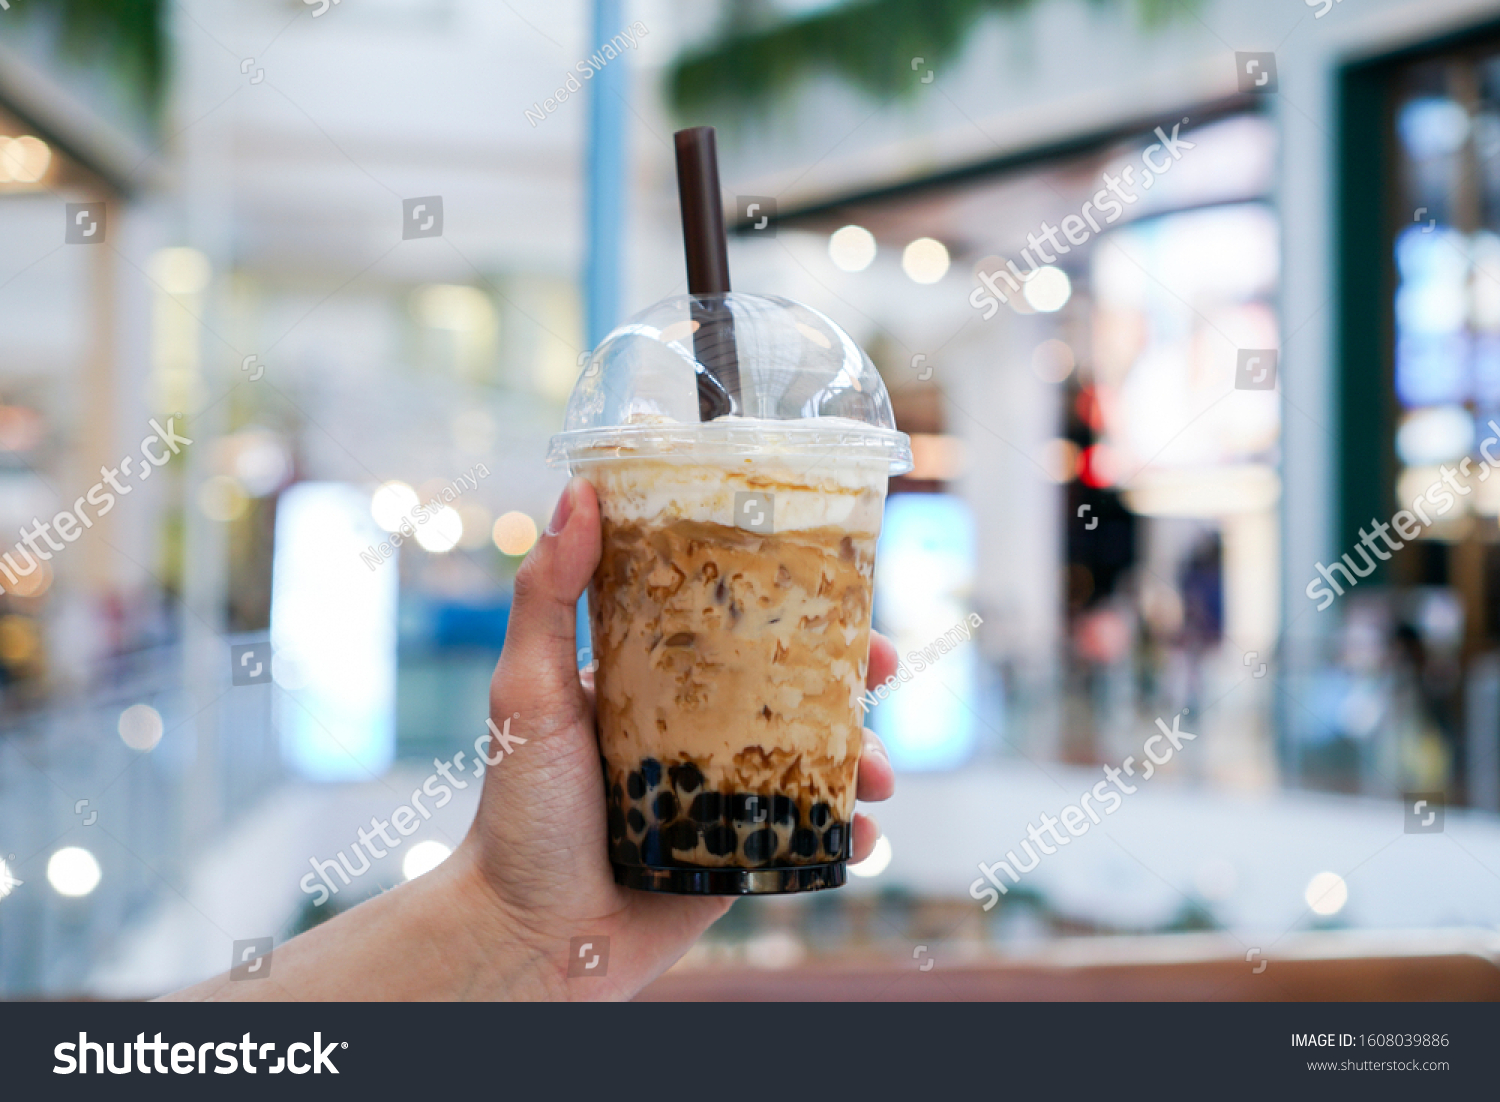 Iced Boba/Bubble Milk tea. A plastic cup of milk tea with boba/bubble tapioca pearls and brown sugar syrup, topped with milk foam. #1608039886